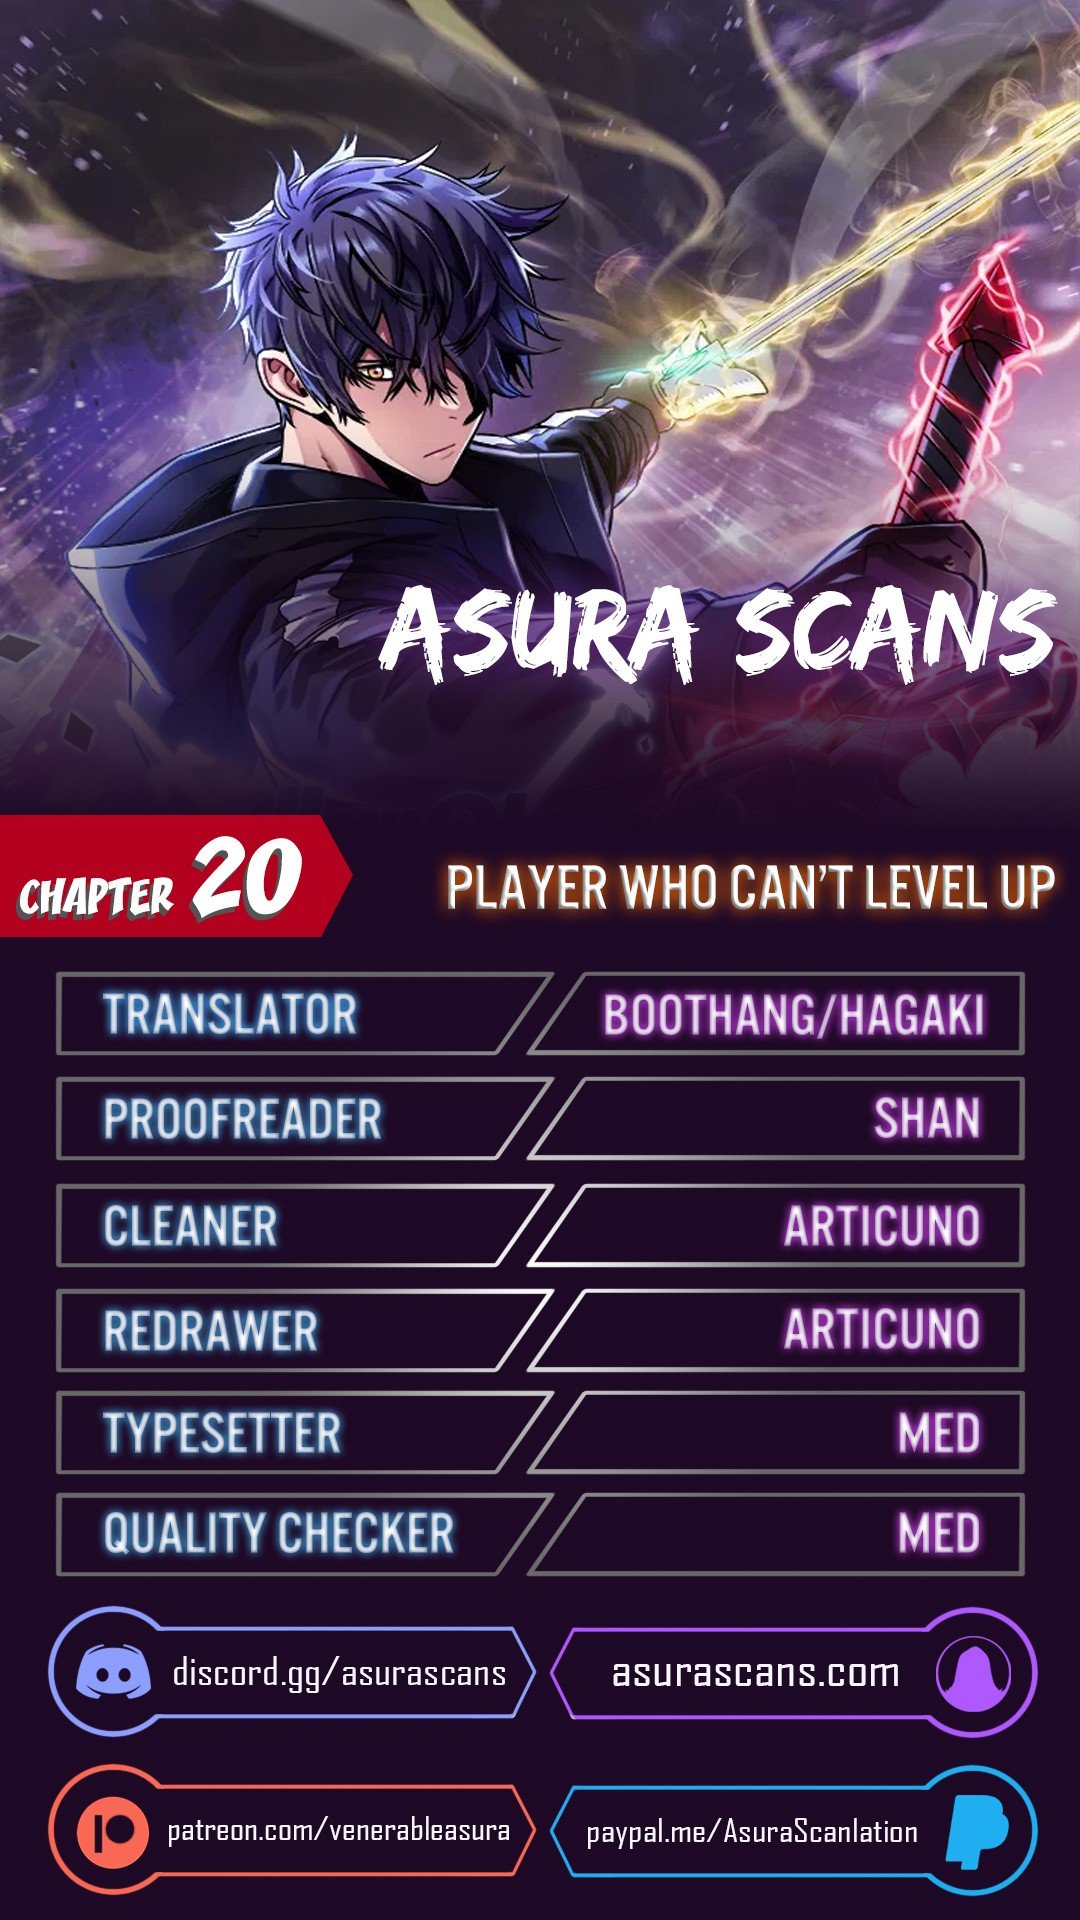 player-who-cant-level-up-chap-20-0